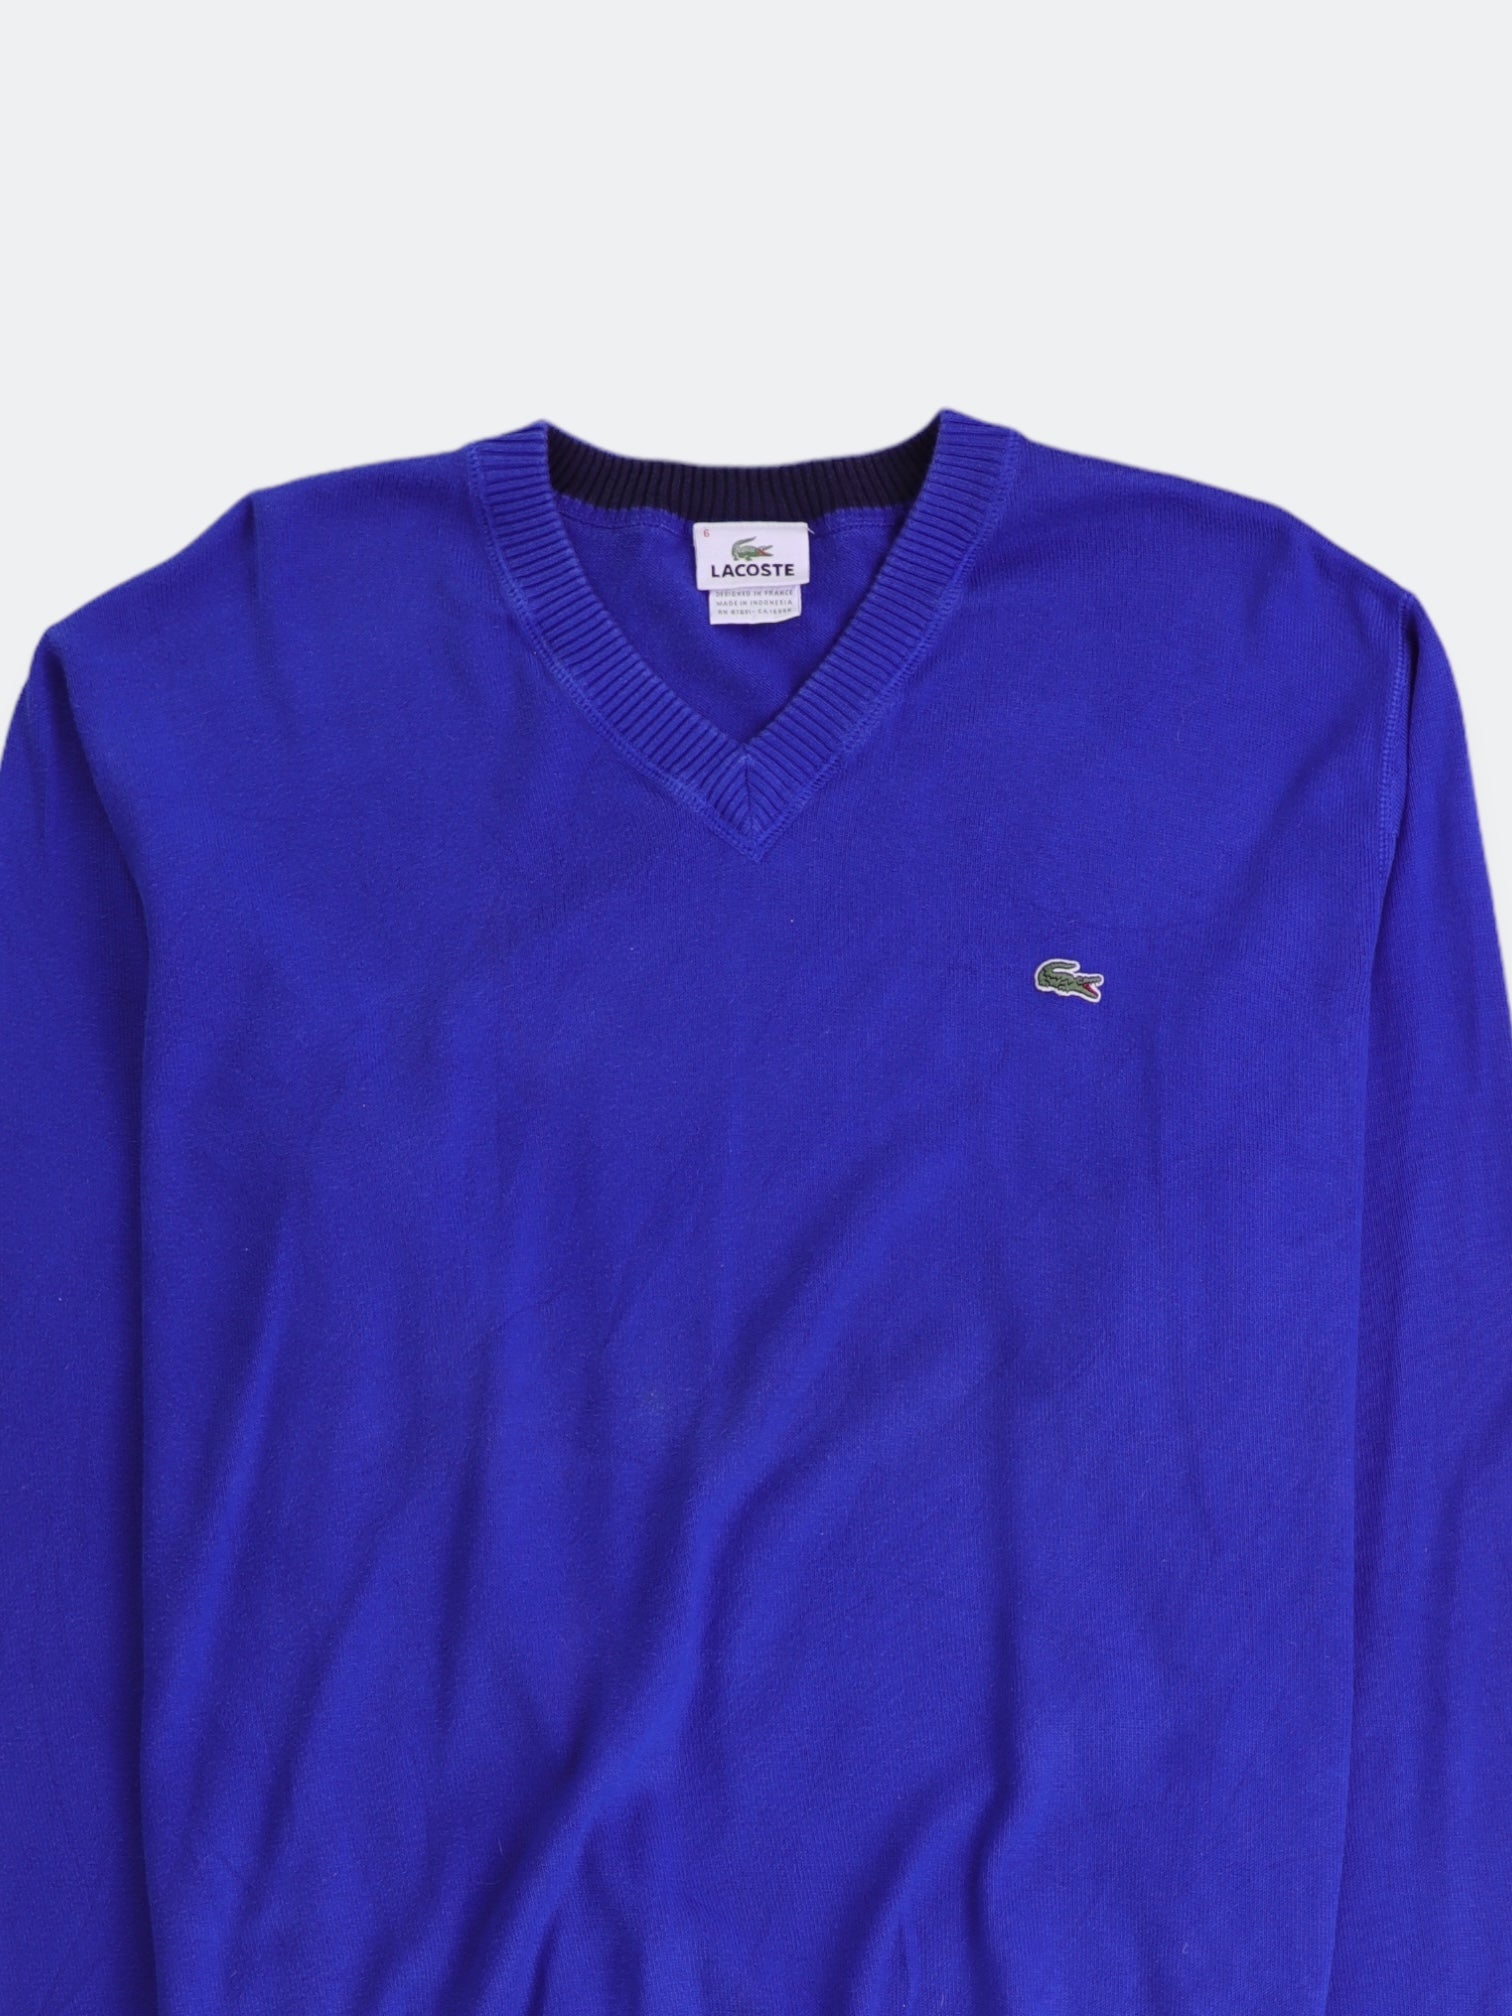 Lacoste Sueter Knit Casual - Hombre - 6